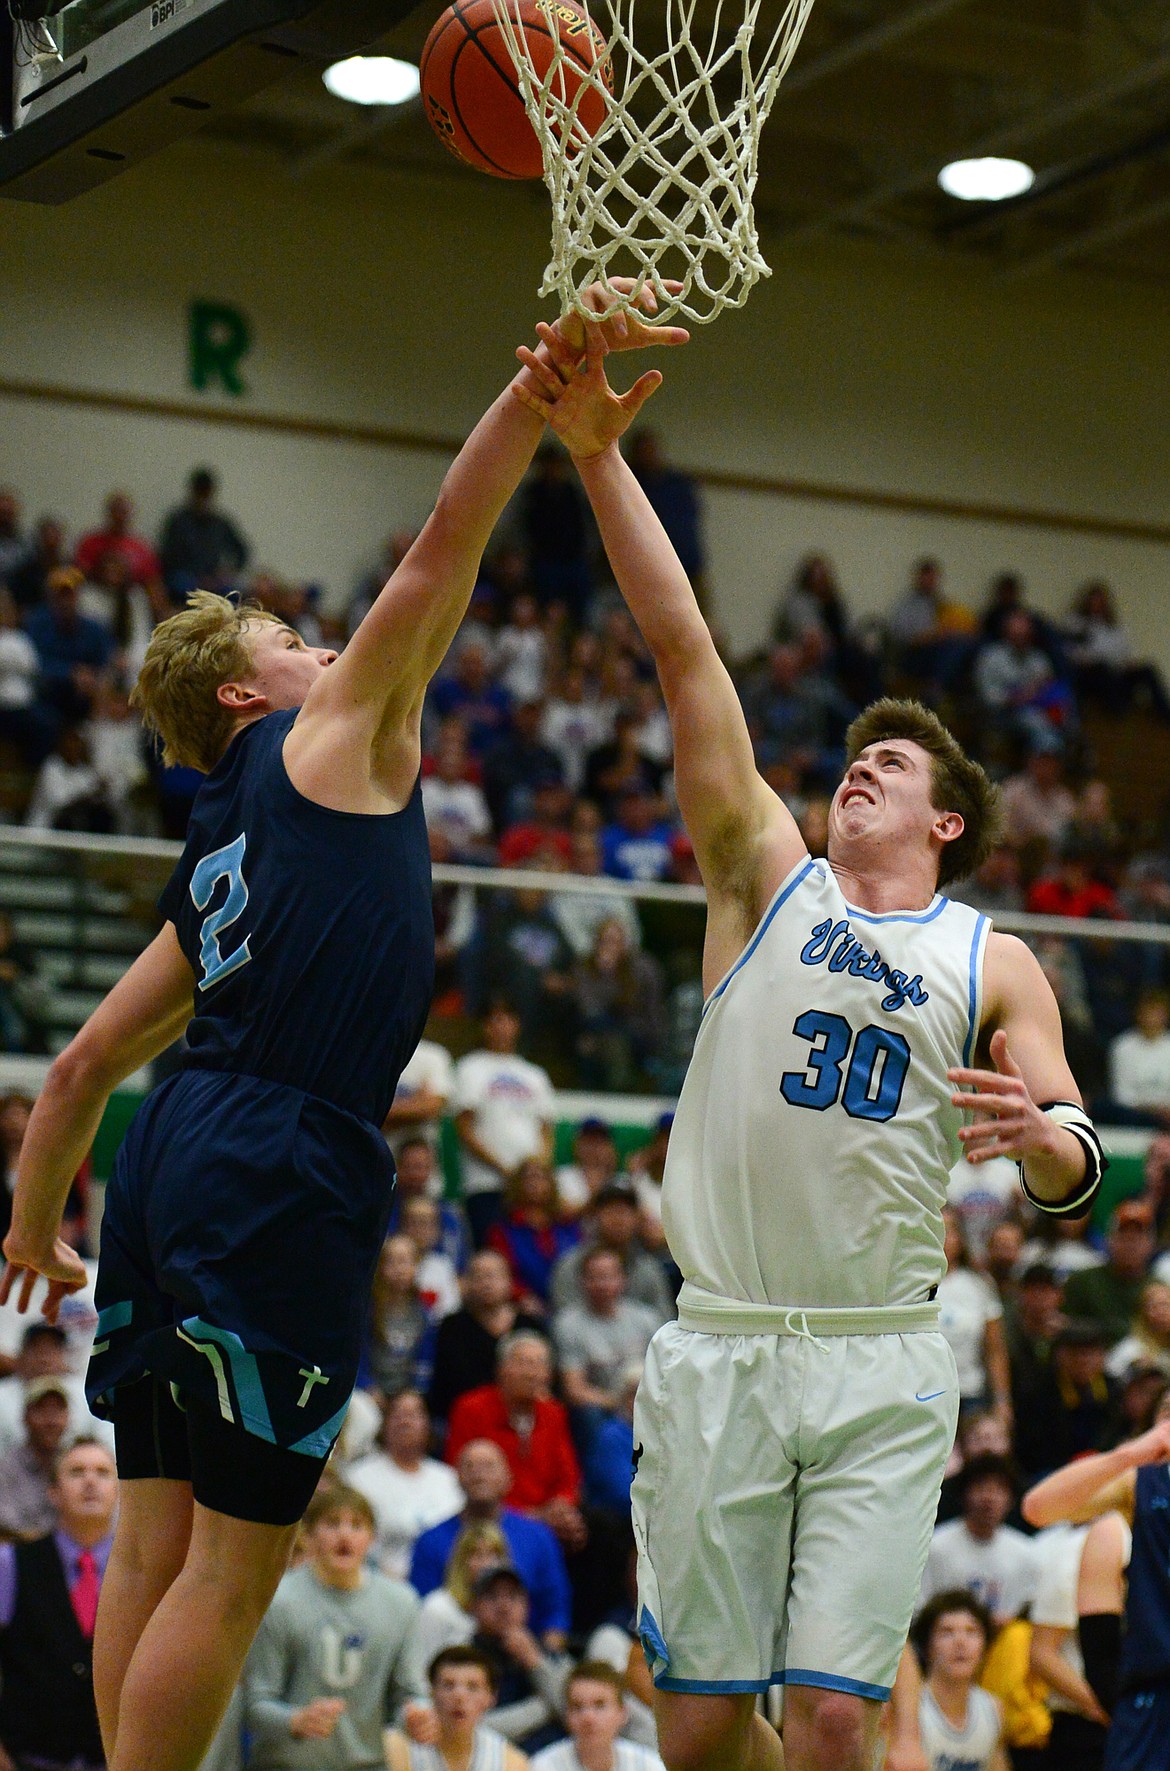 Bigfork's Logan Gilliard (30) drives to the hoop against Loyola Sacred Heart's Ryan Tirrell (2)  in the State Class B boys' basketball championship at the Belgrade Special Events Center in Belgrade on Friday. (Casey Kreider/Daily Inter Lake)